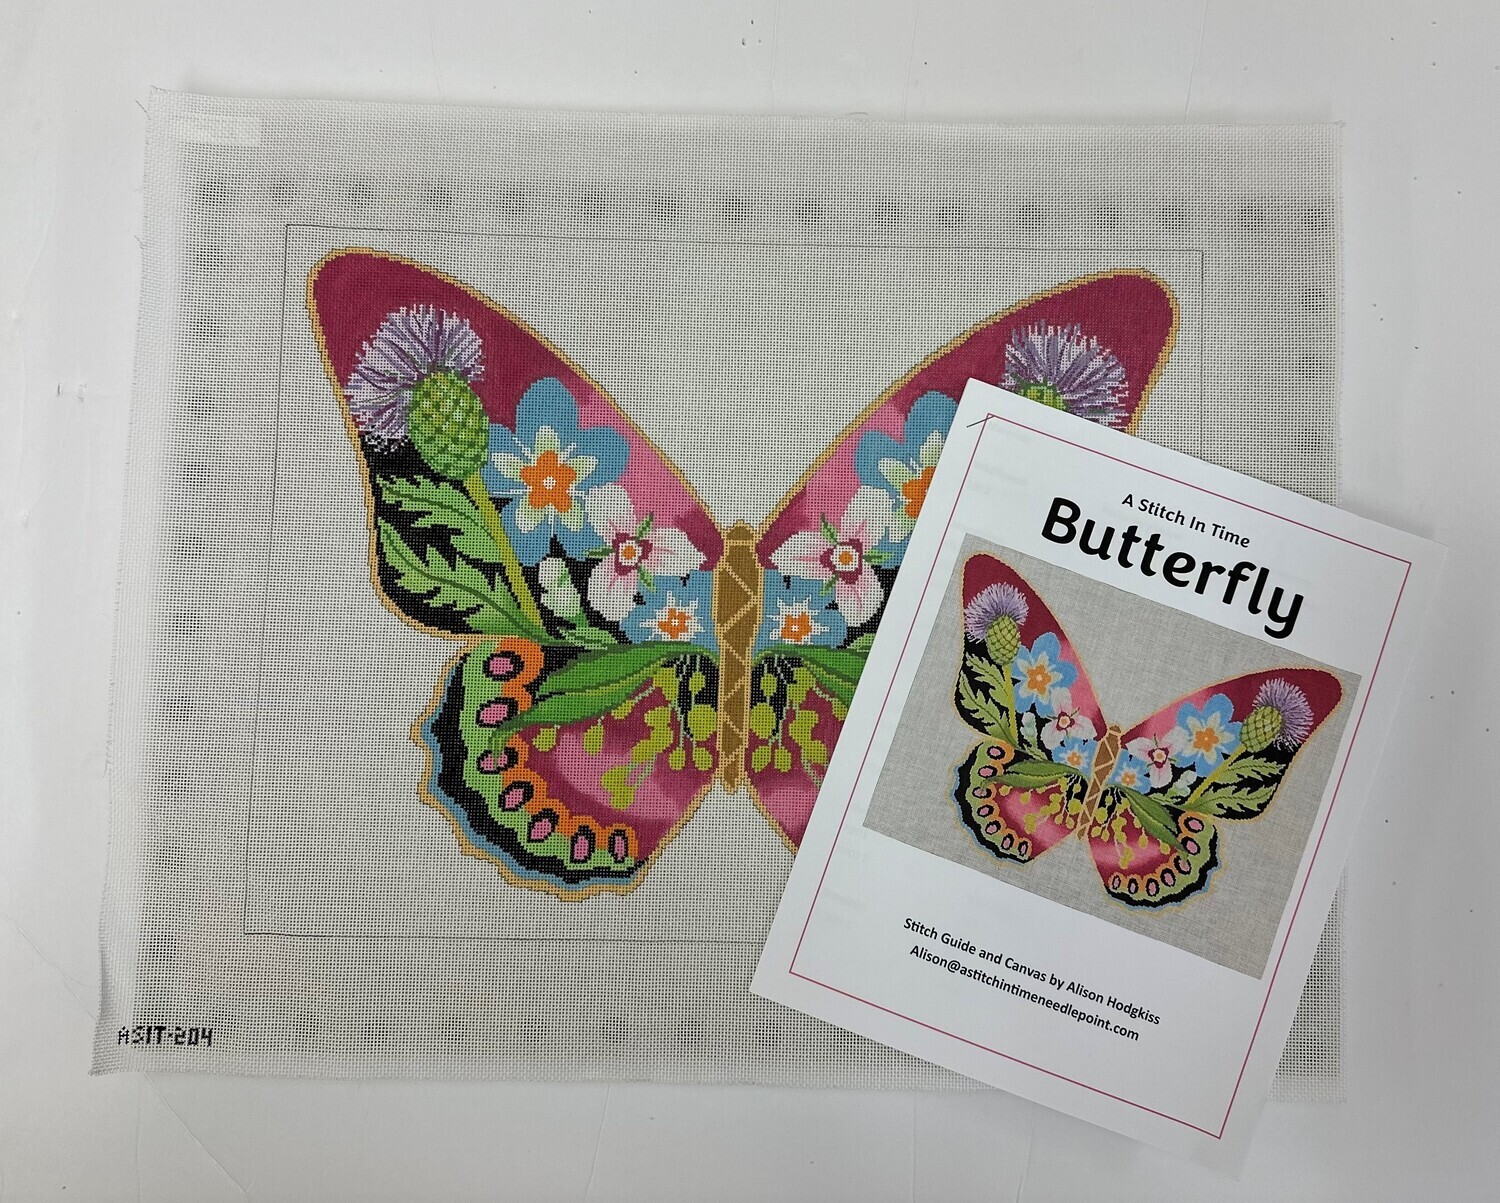 Thistle Butterfly with Stitch Guide (Handpainted by ASIT)